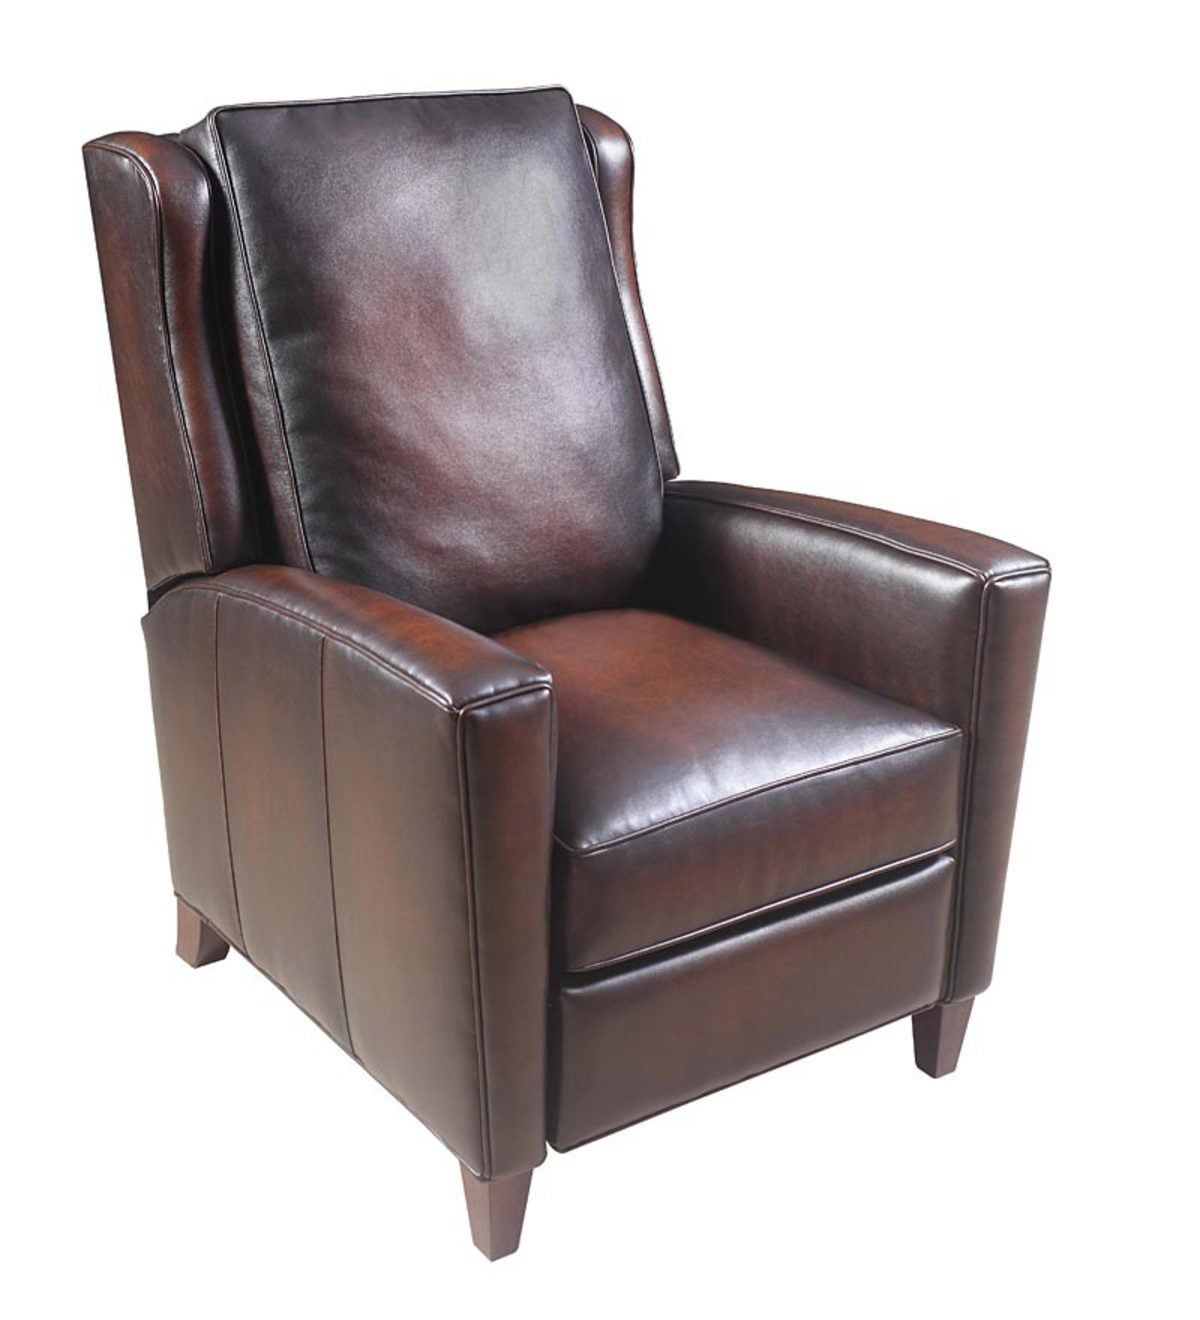 Miller Dark Brown Leather Recliner | Plowhearth Pertaining To Dark Wood Outdoor Reclining Chairs (View 1 of 15)